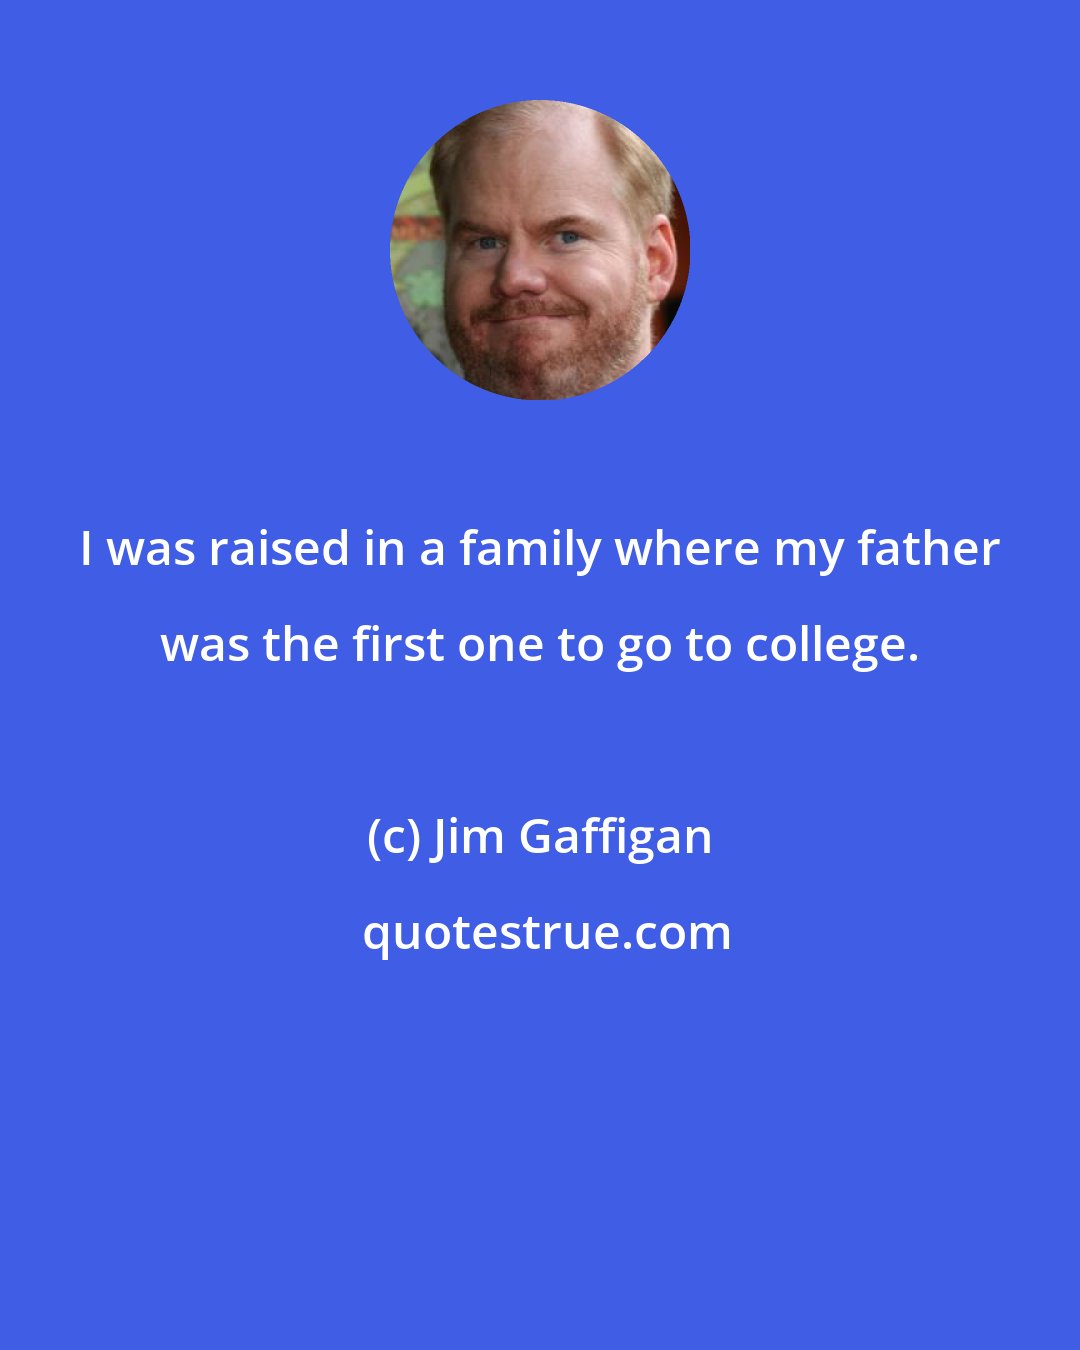 Jim Gaffigan: I was raised in a family where my father was the first one to go to college.